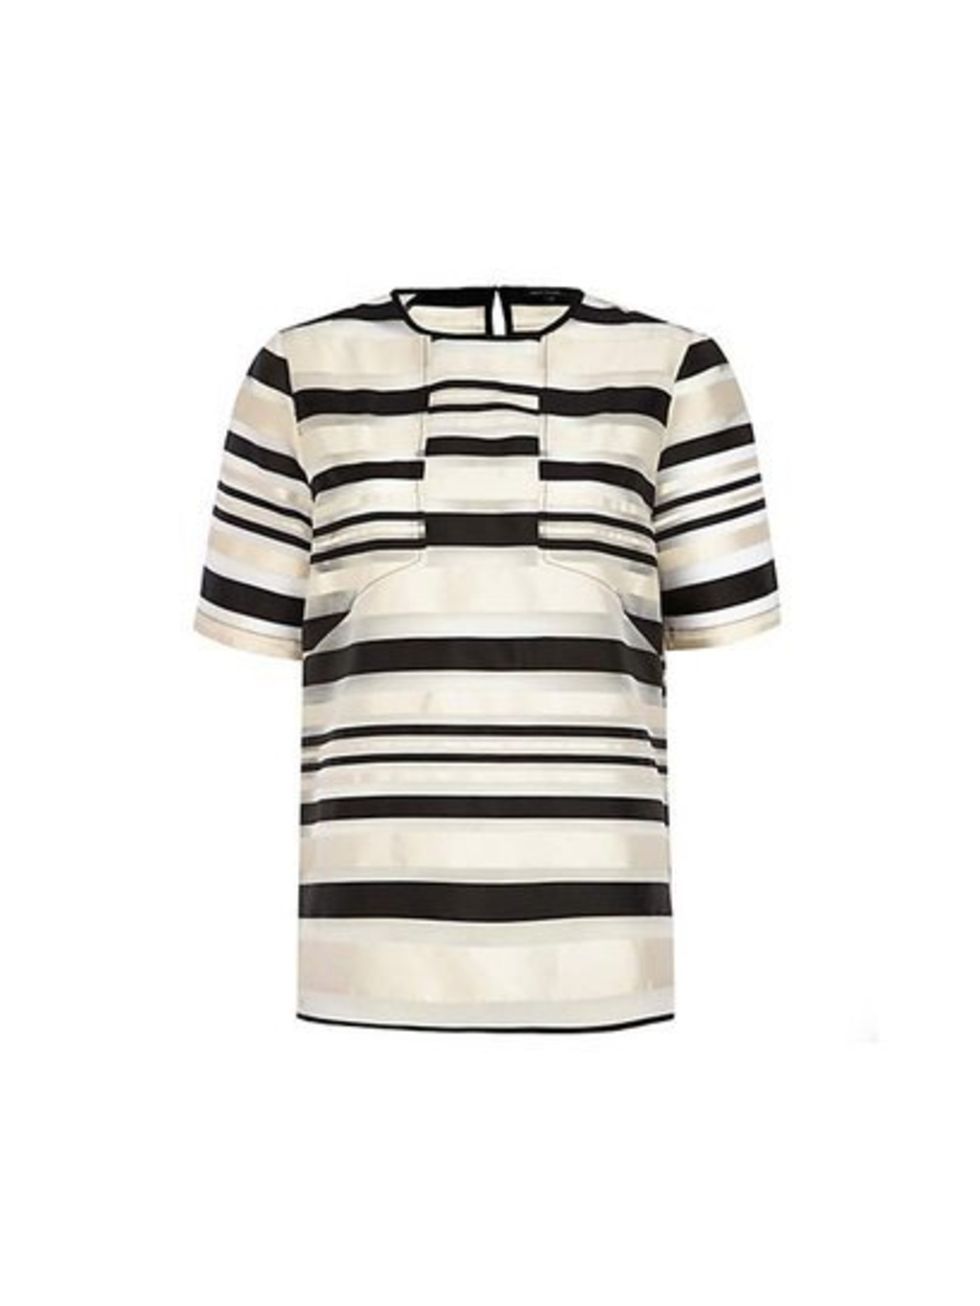 Pair with cigarette pants, like Executive Fashion Director Kirsty Dale.

River Island top, £35